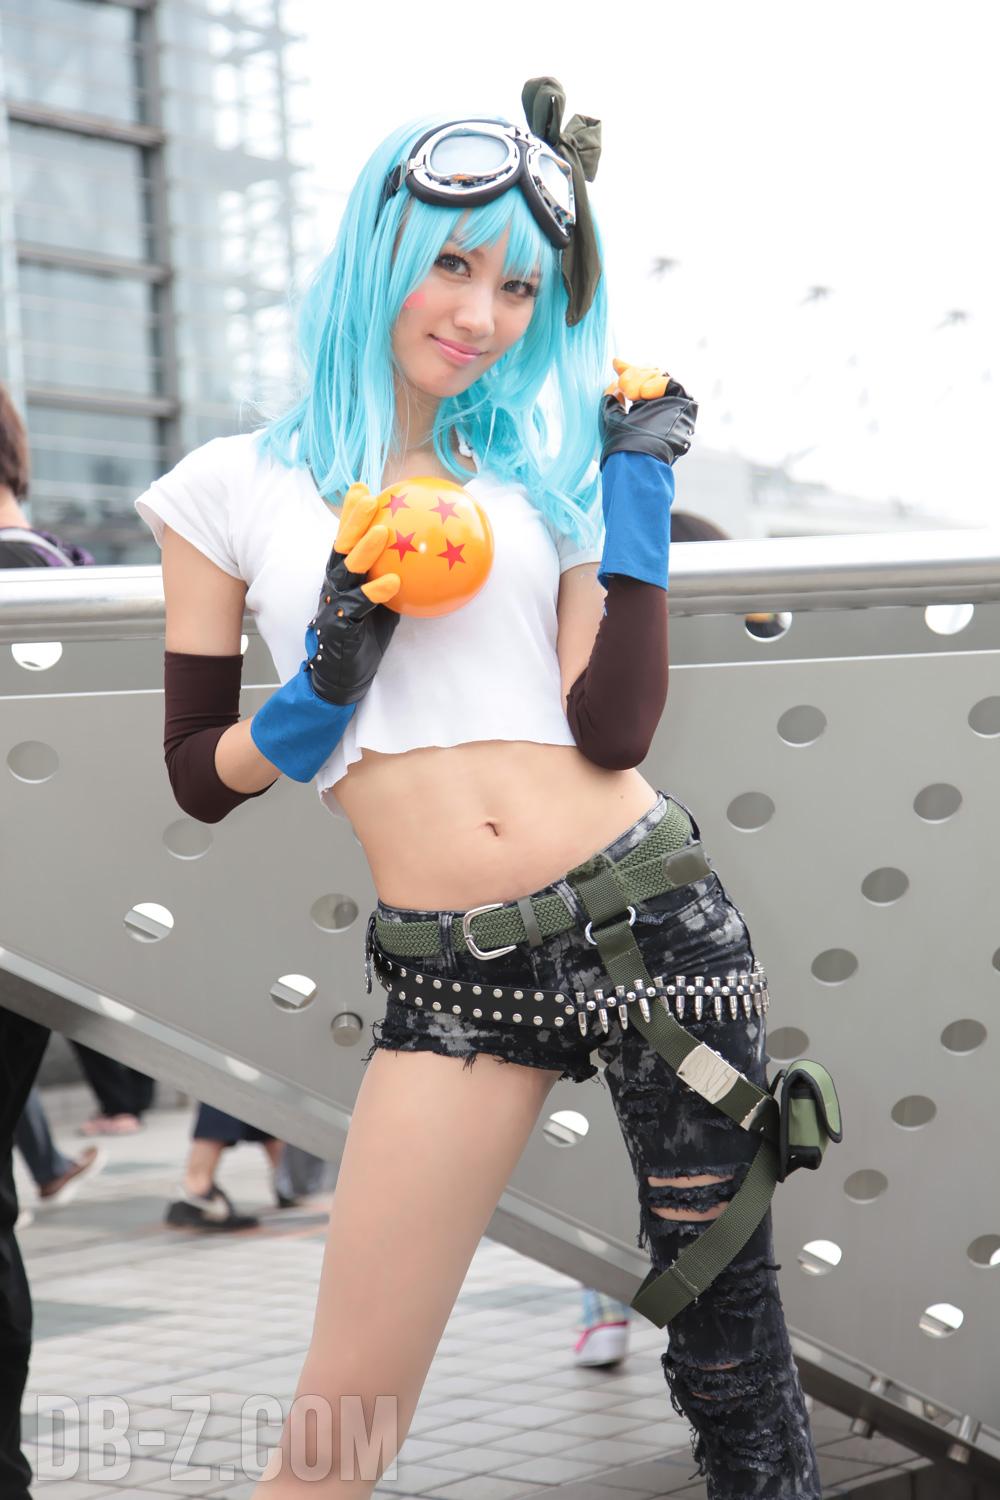 70+ Hot Pictures Of Bulma From Dragon Ball Z Are Sure To Get Your Heart Thumping Fast 20